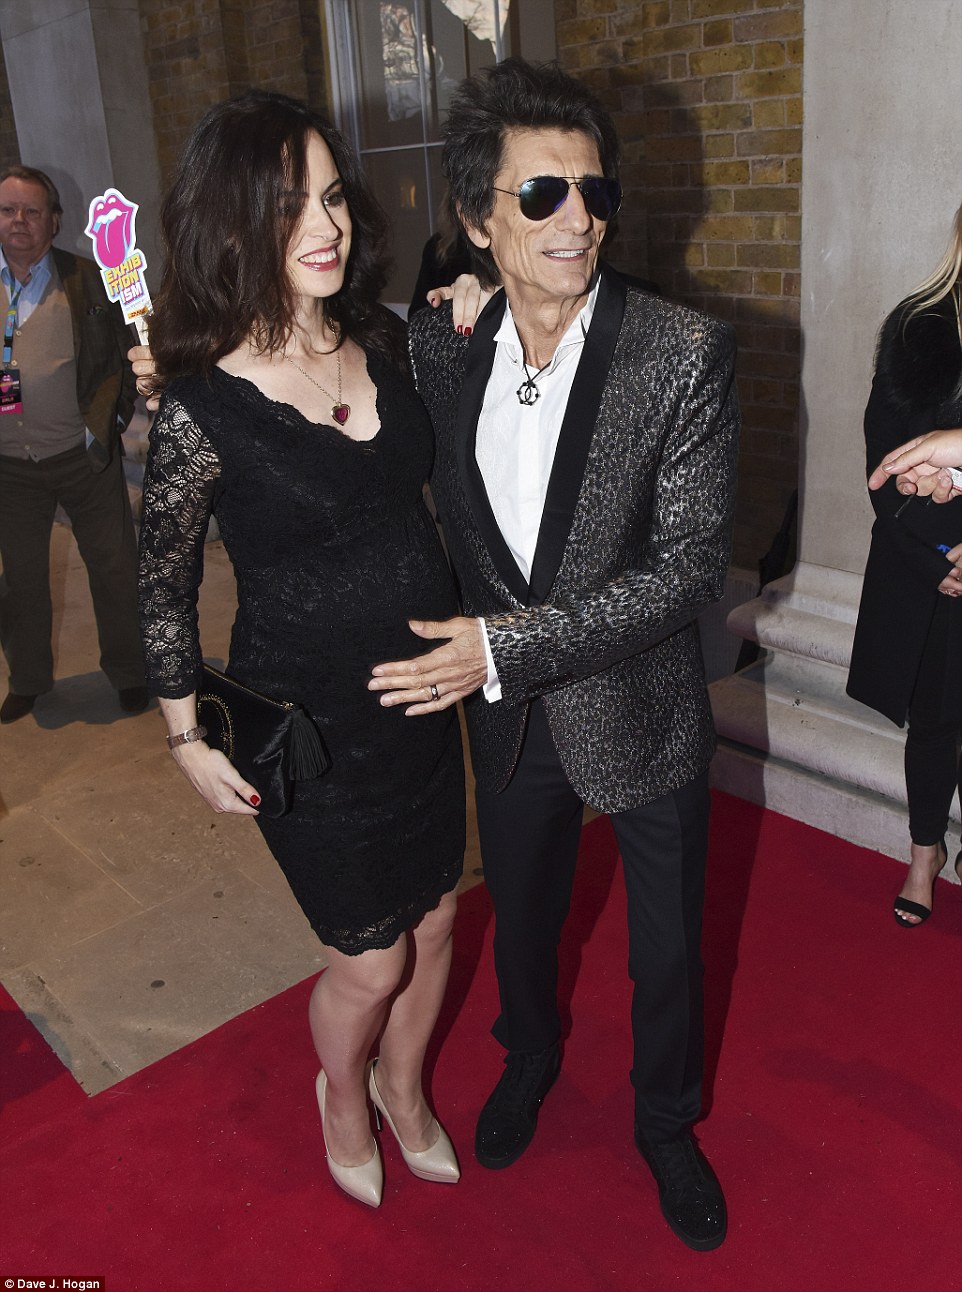 Ronnie Wood and wife